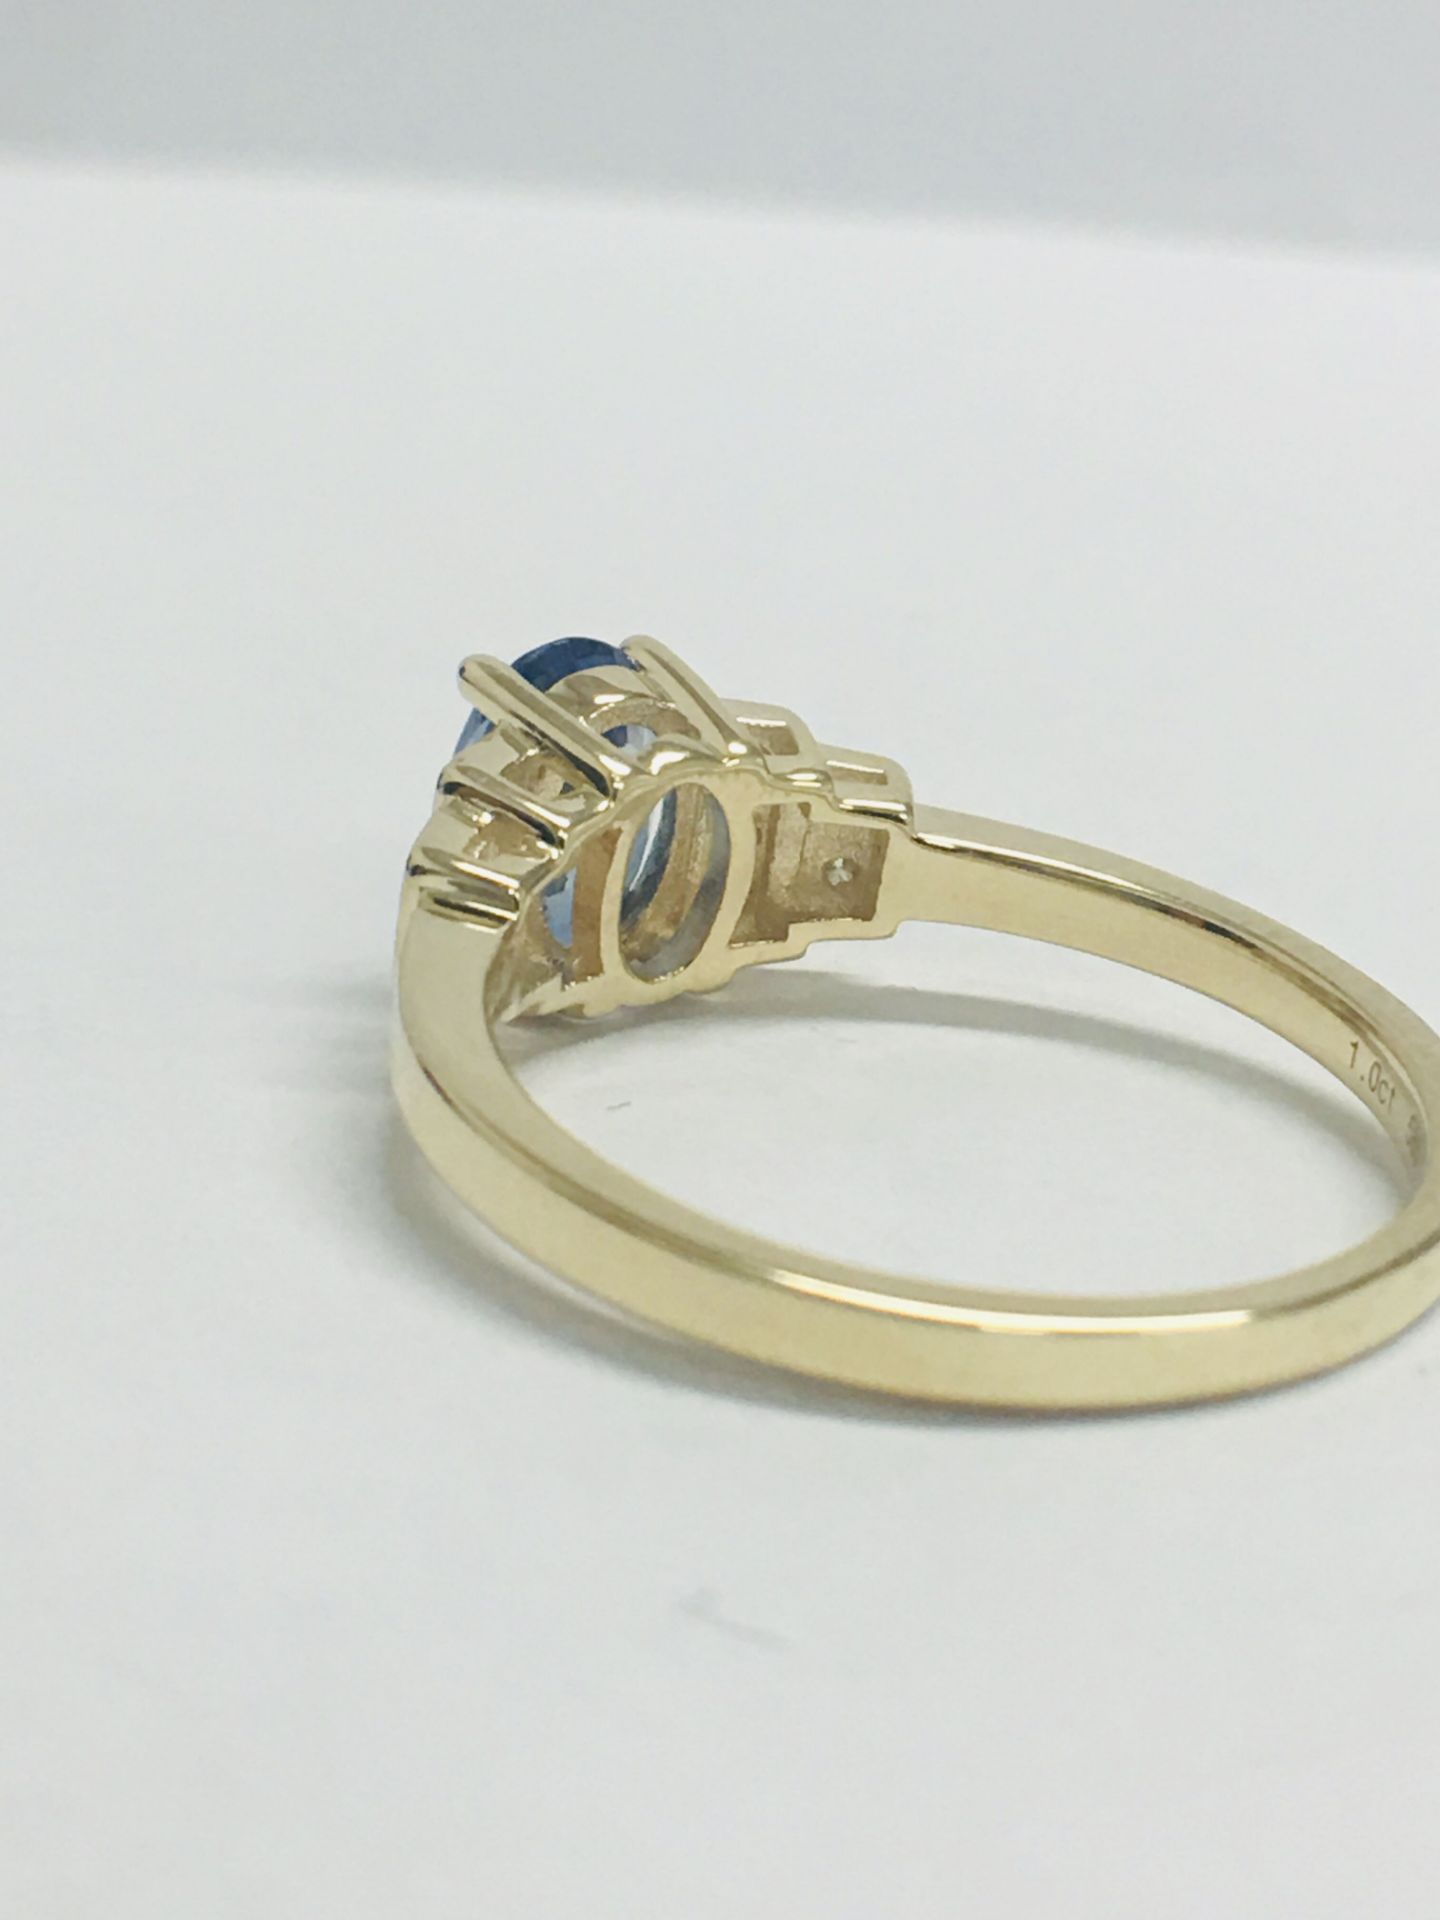 14ct Yellow Gold Sapphire and Diamond Ring. - Image 4 of 10